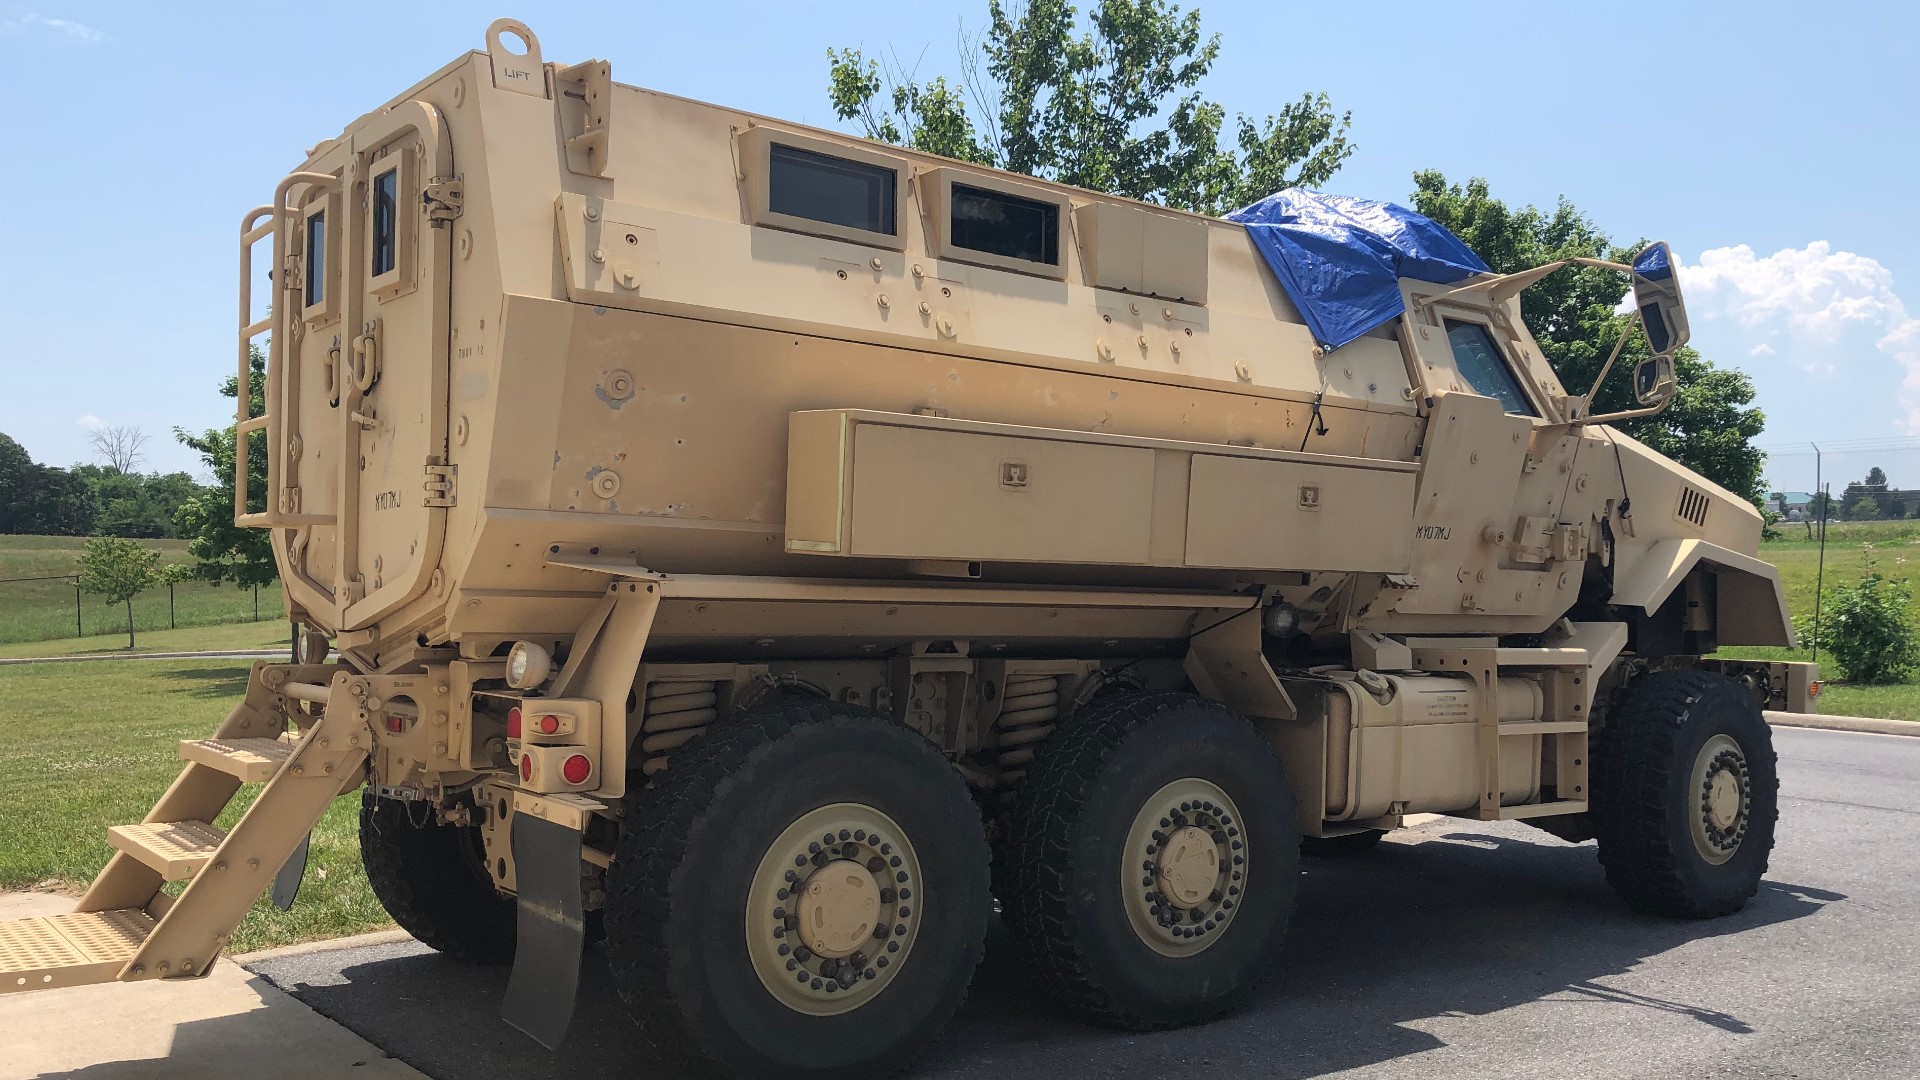 WUSA9 investigation finds police in MD and VA have received $5 million in military equipment over the past three years, including night-vision sniper scopes, MRAPs.